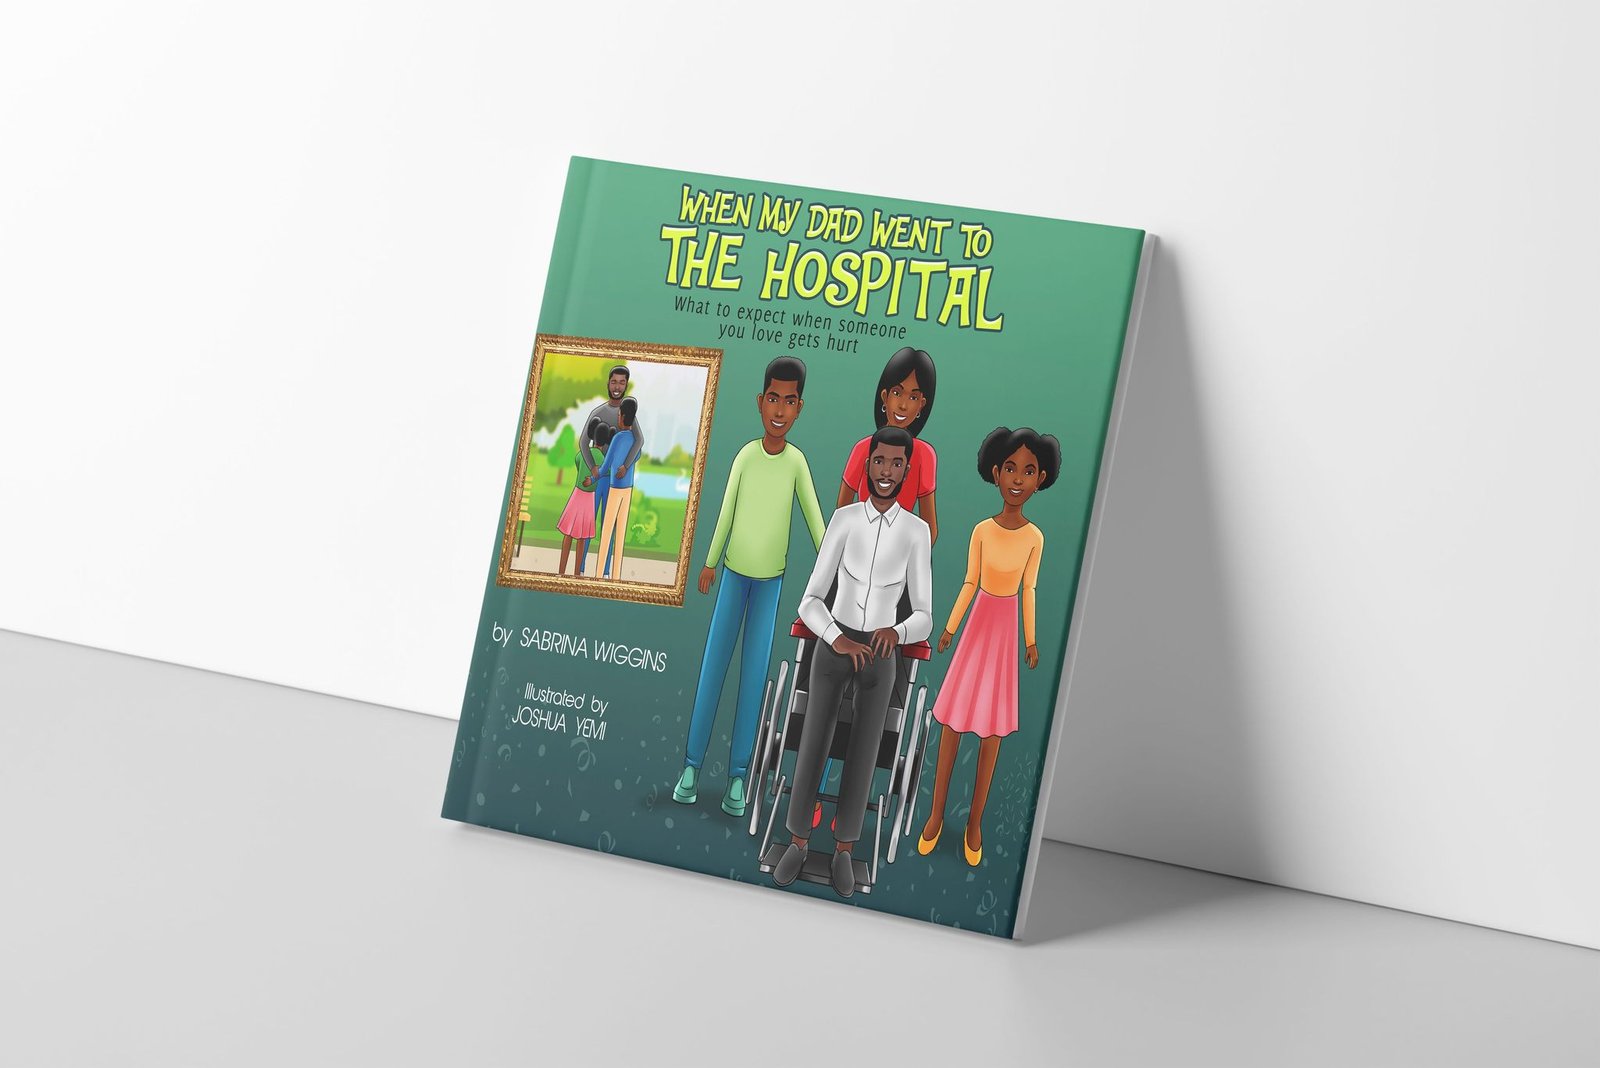 On Inauguration Day, Sabrina Wiggins's Newly Released Children’s Book “When My Dad Went To The Hospital” Raced To The Top Of  Bestseller Lists With Joey By Jill Biden